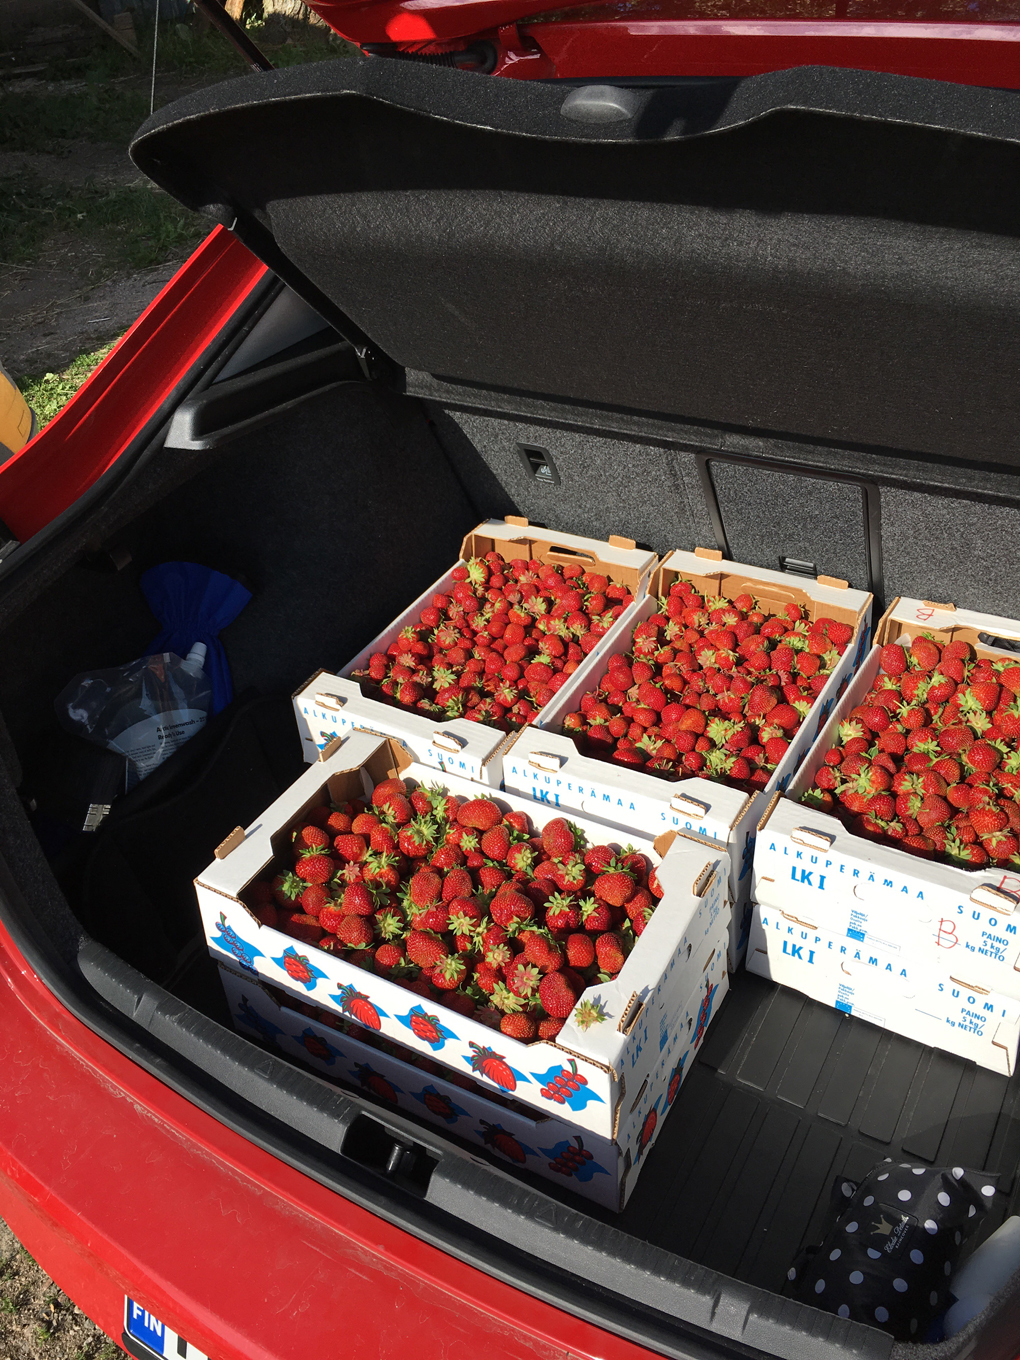 A car boot full of strawberry boxes